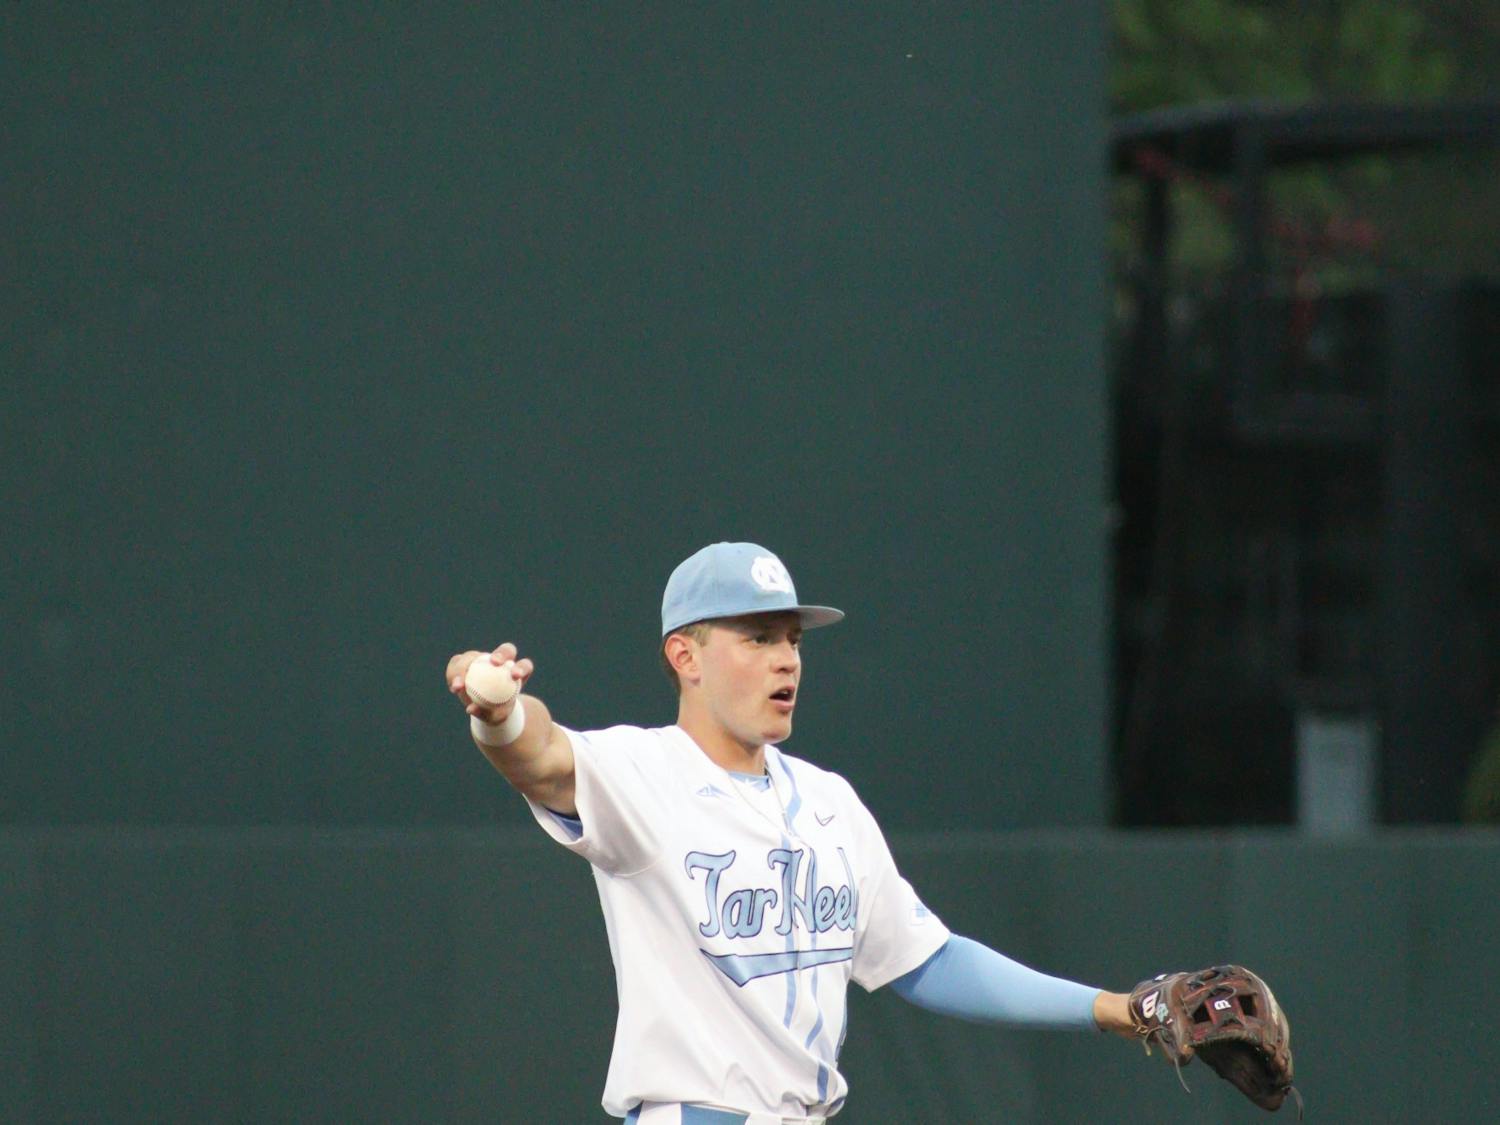 Shortstop Danny Serretti (1) calls out after catching an outfield ball during a baseball game against North Carolina A&amp;T. UNC lost 6-7 at home on Tuesday, April 12, 2022.